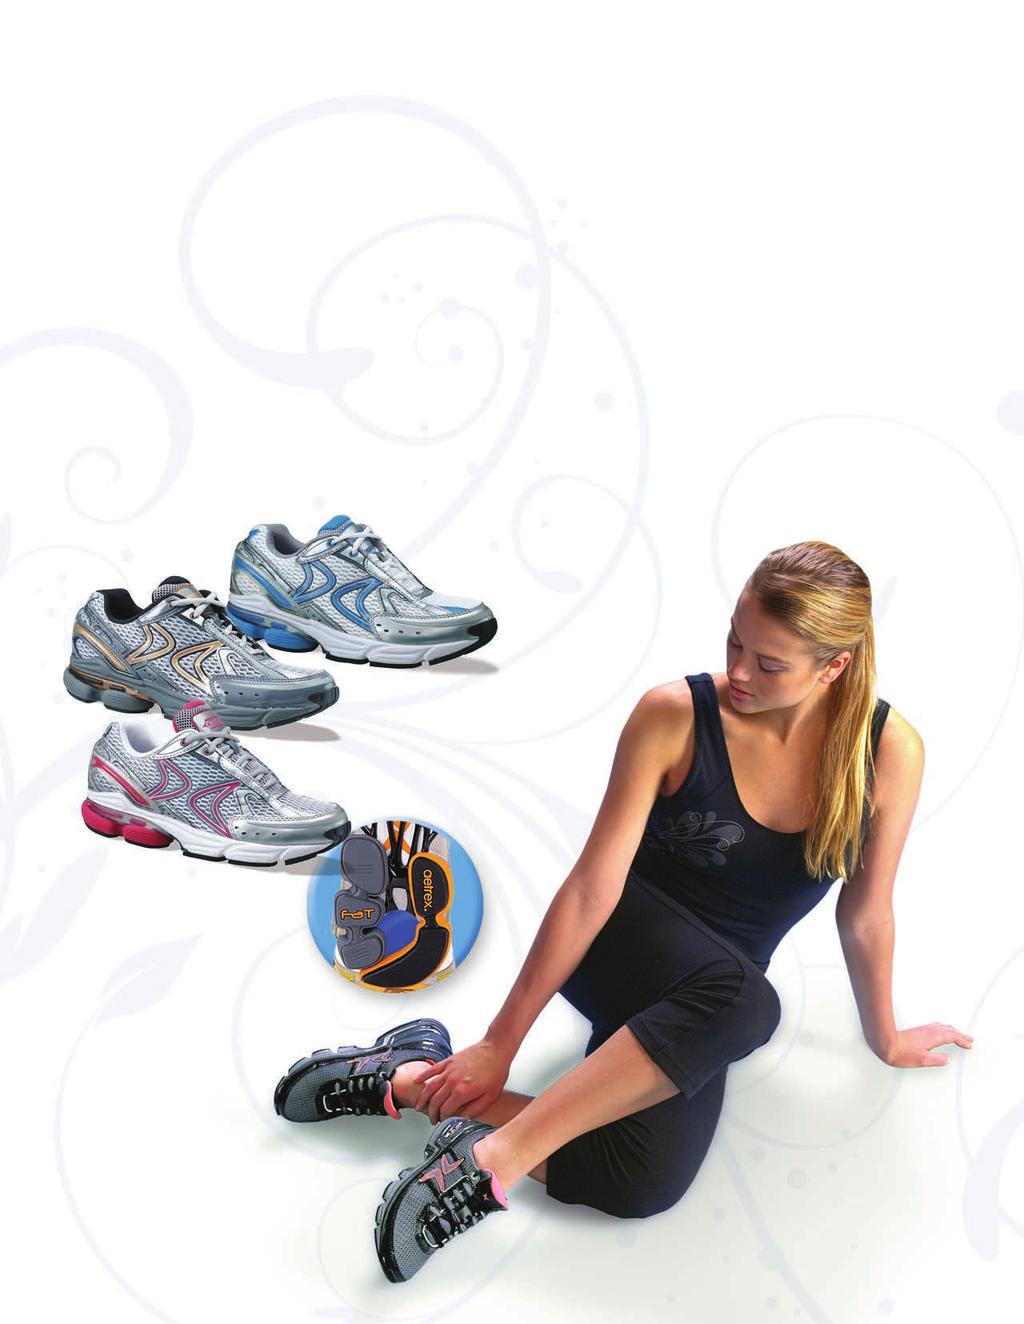 women s performance built for you to go the distance RX RUNNERS - Q last for rearfoot stability & forefoot freedom - Midsole stability plate for torsional rigidity & pressure dispersion - TPU